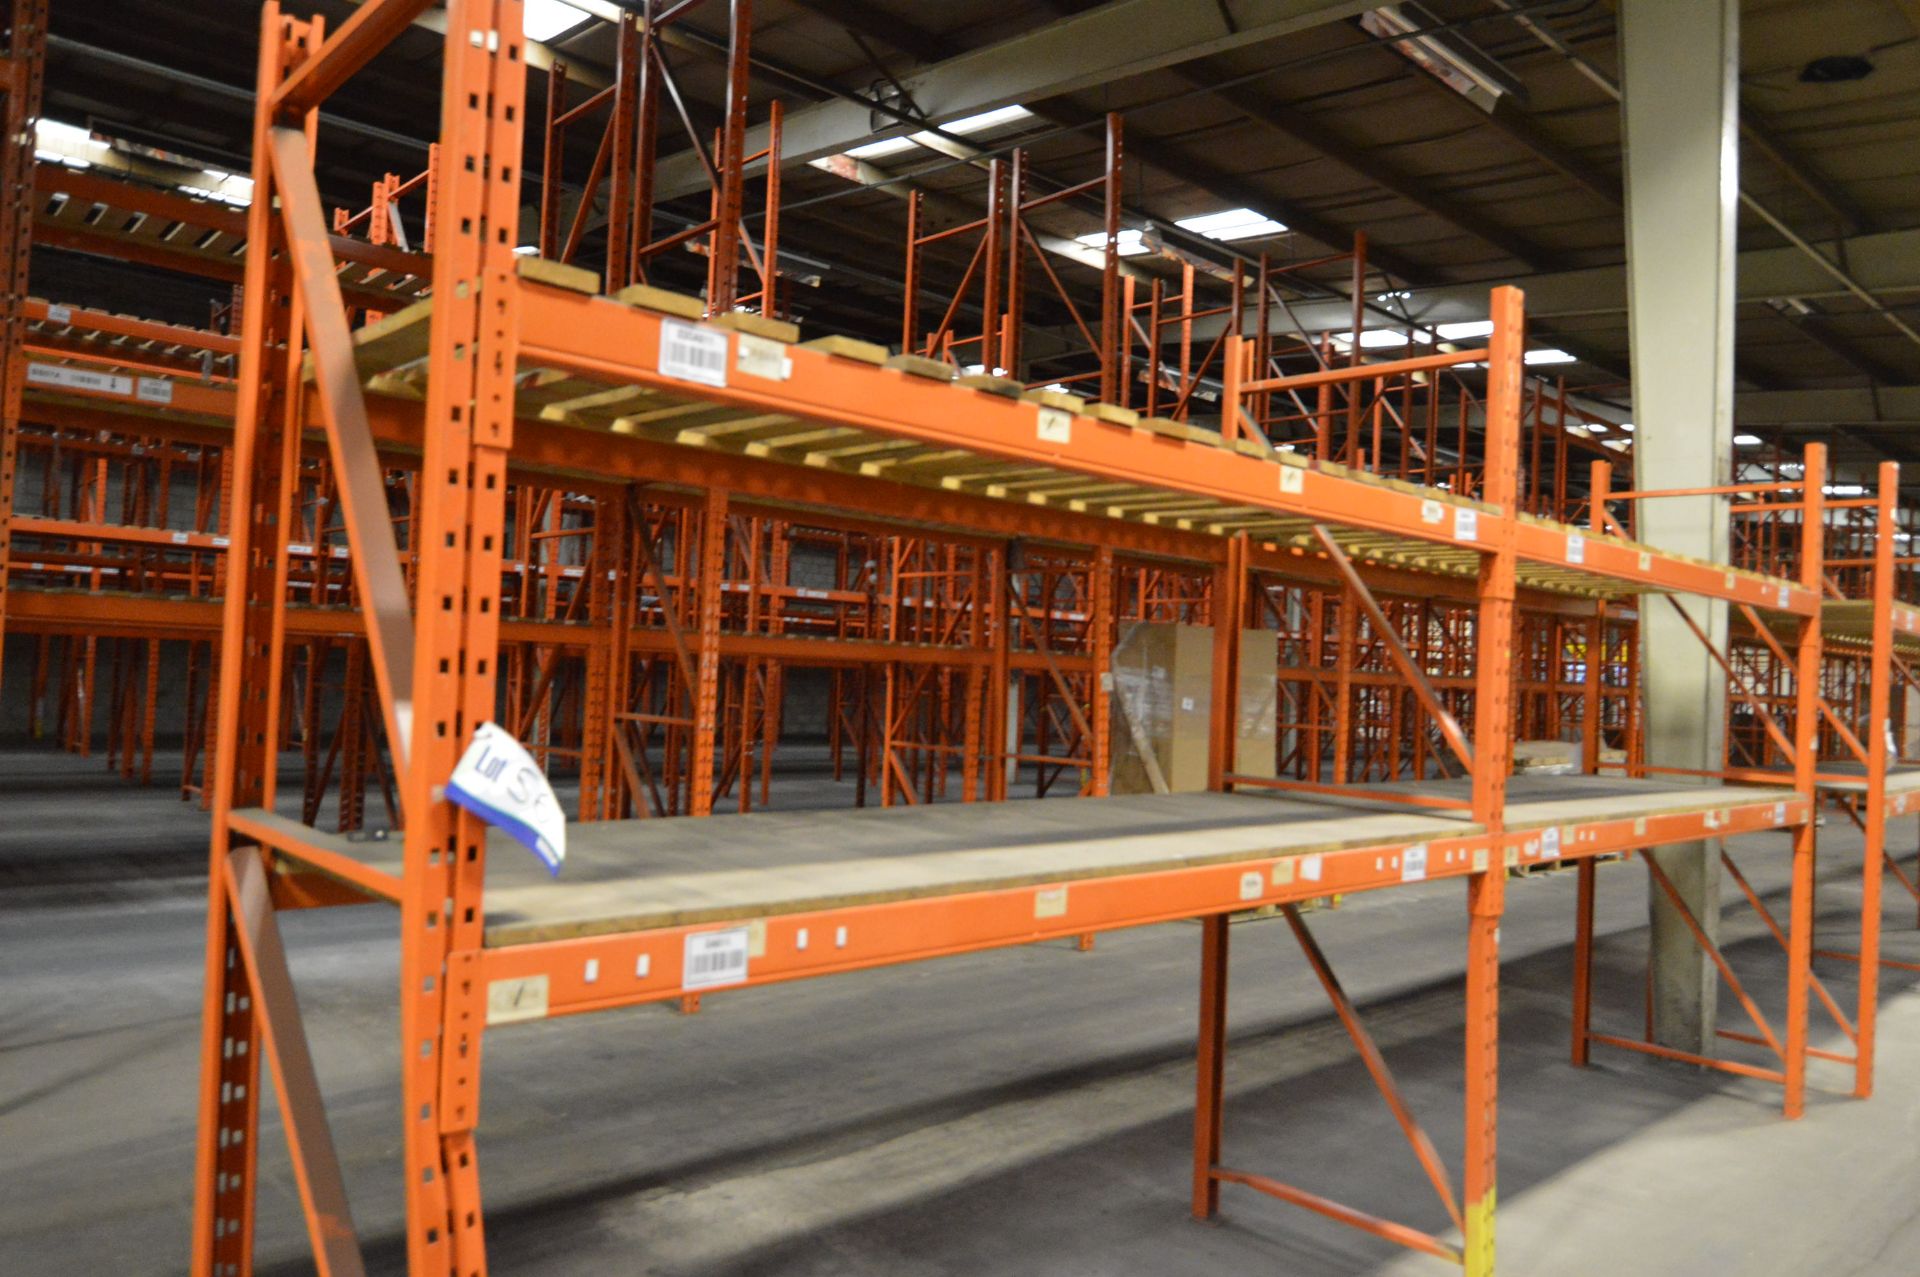 Redirack SD1.70 Single Sided Two Bay Two Tier Pallet Rack, approx. 5.5m long x 900mm x 2.7m high, - Image 2 of 2